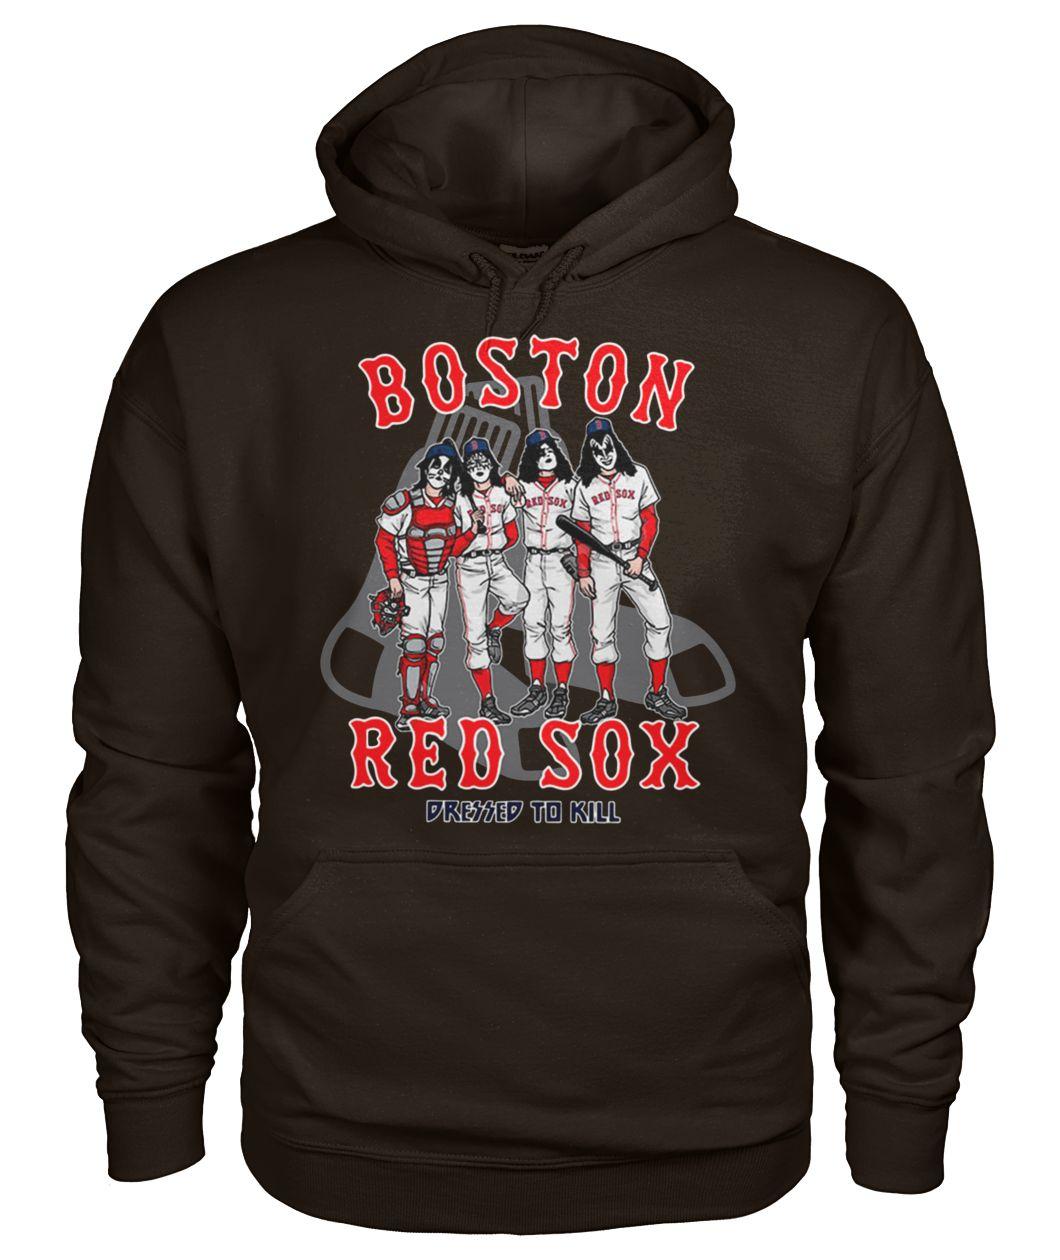 Boston red sox dressed to kill kiss rock band hoodie